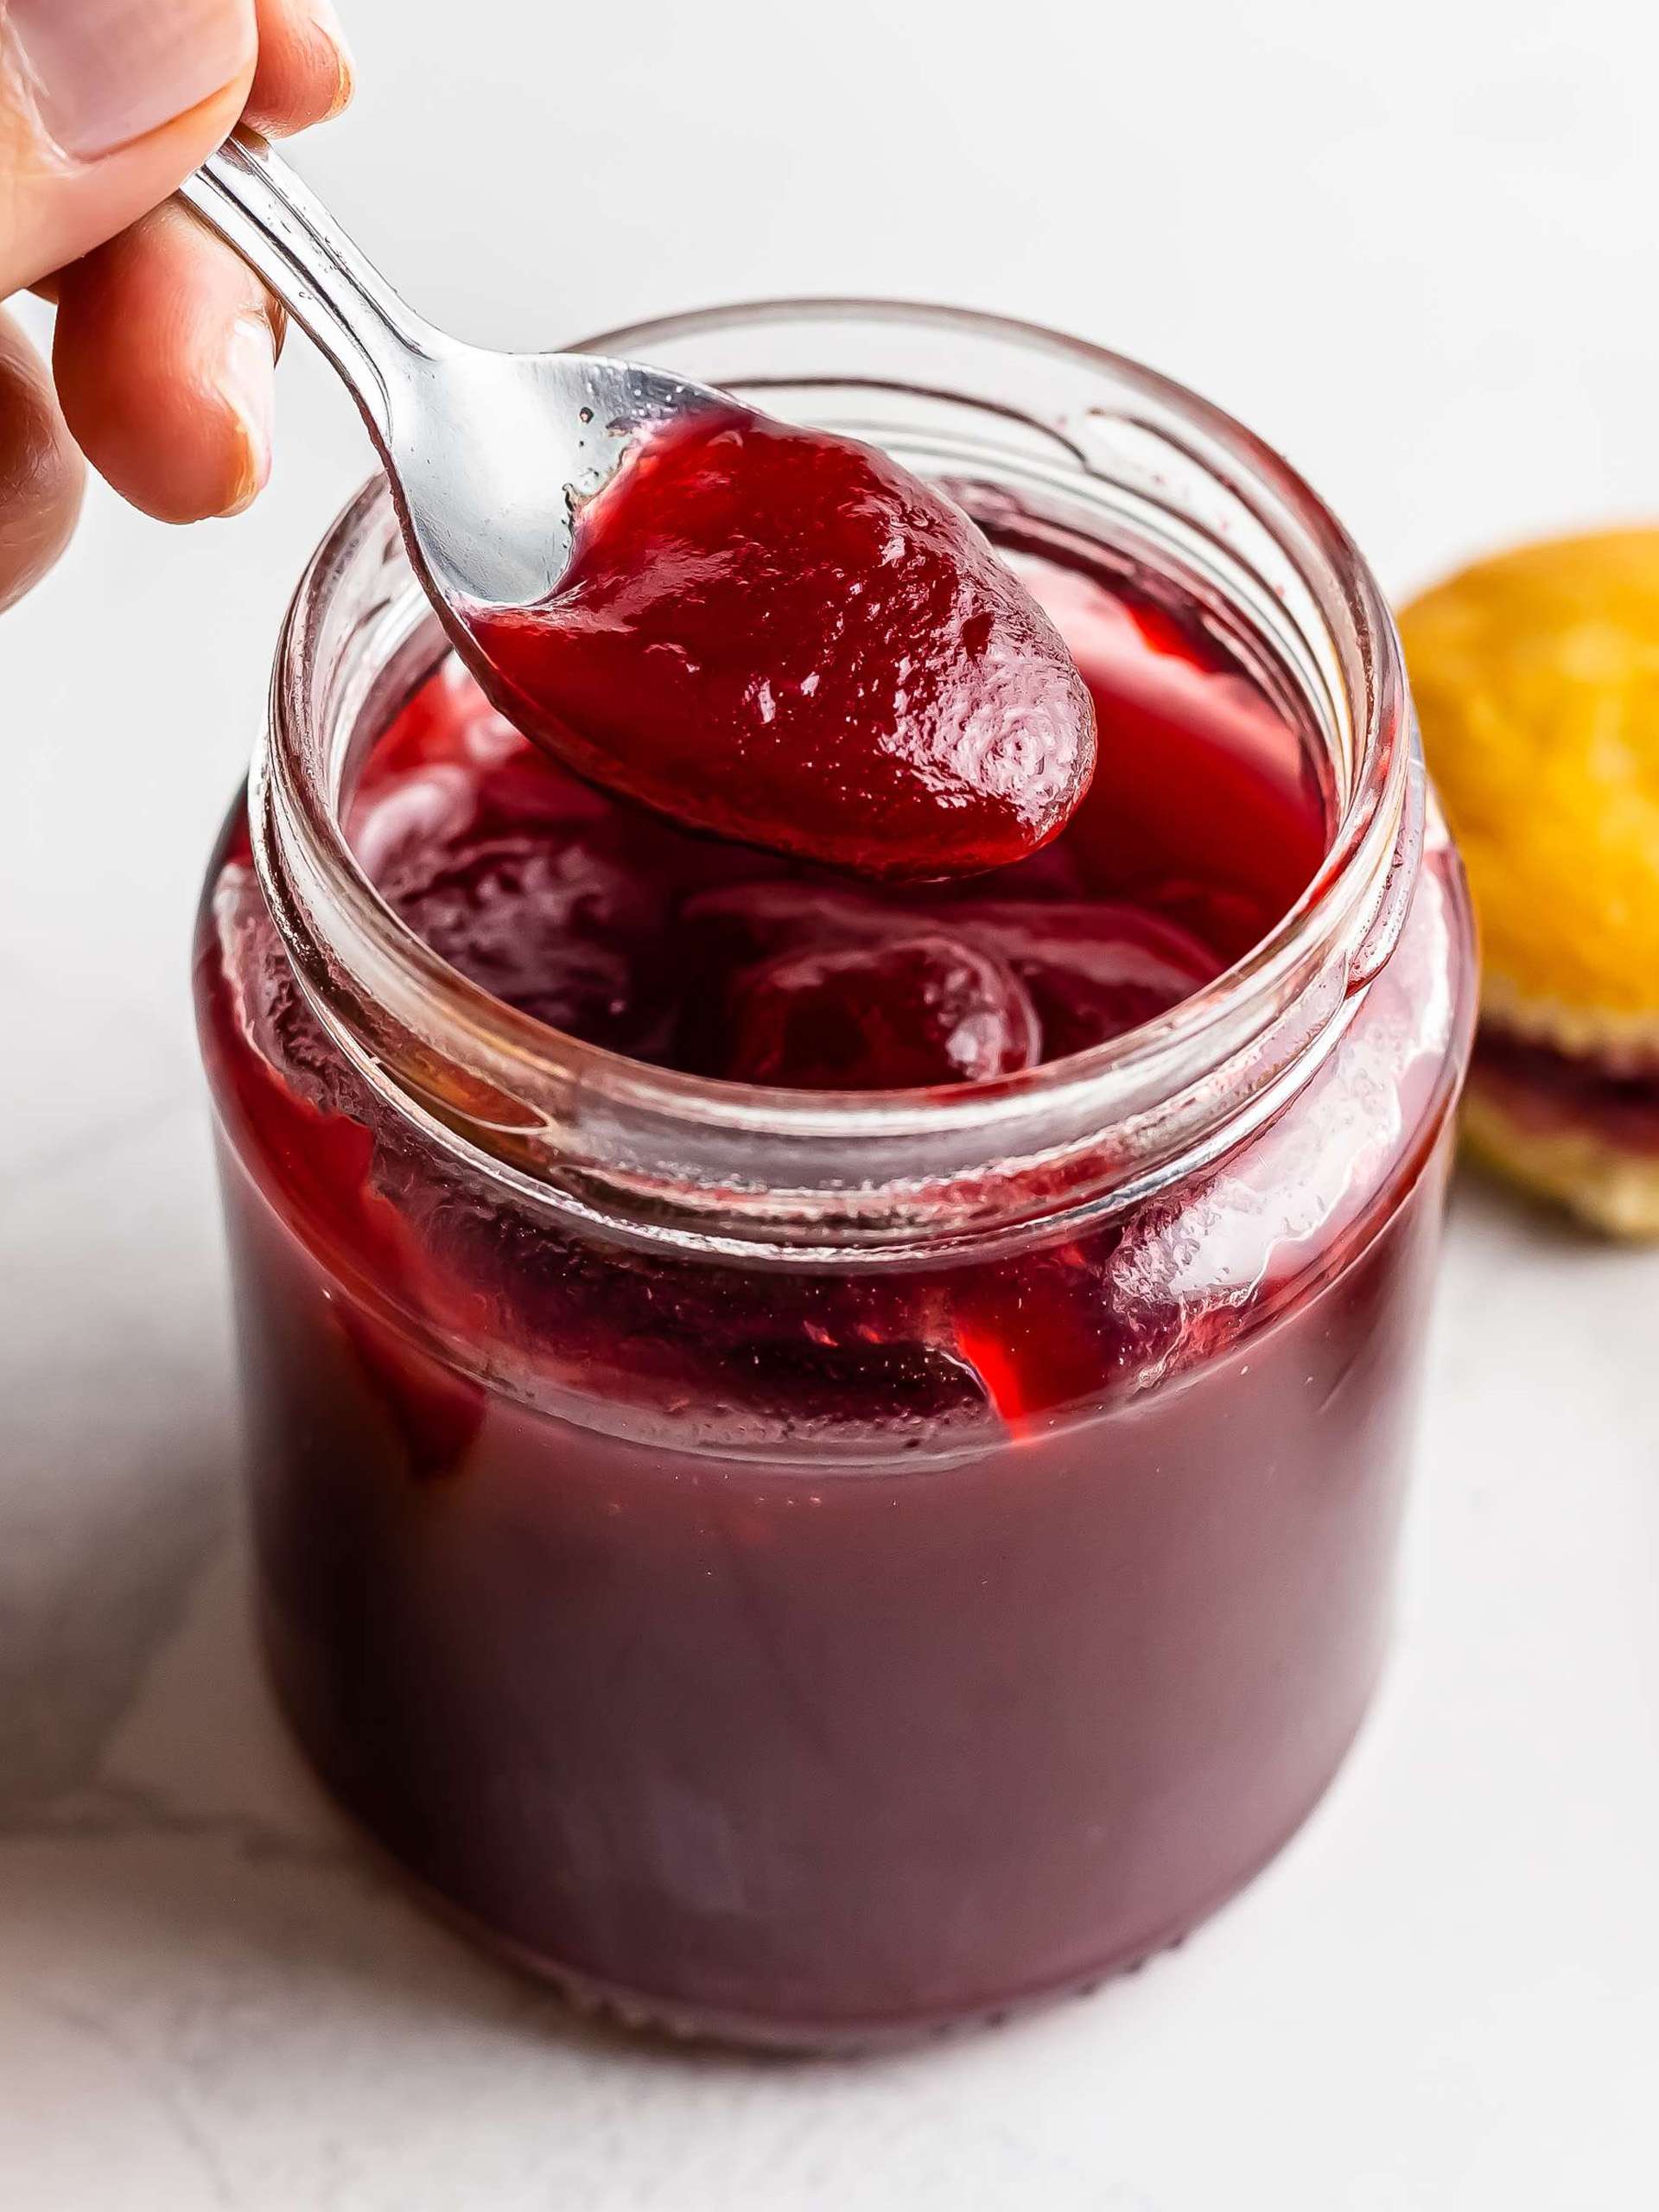 Ditch Store-Bought Jams and Do This Instead